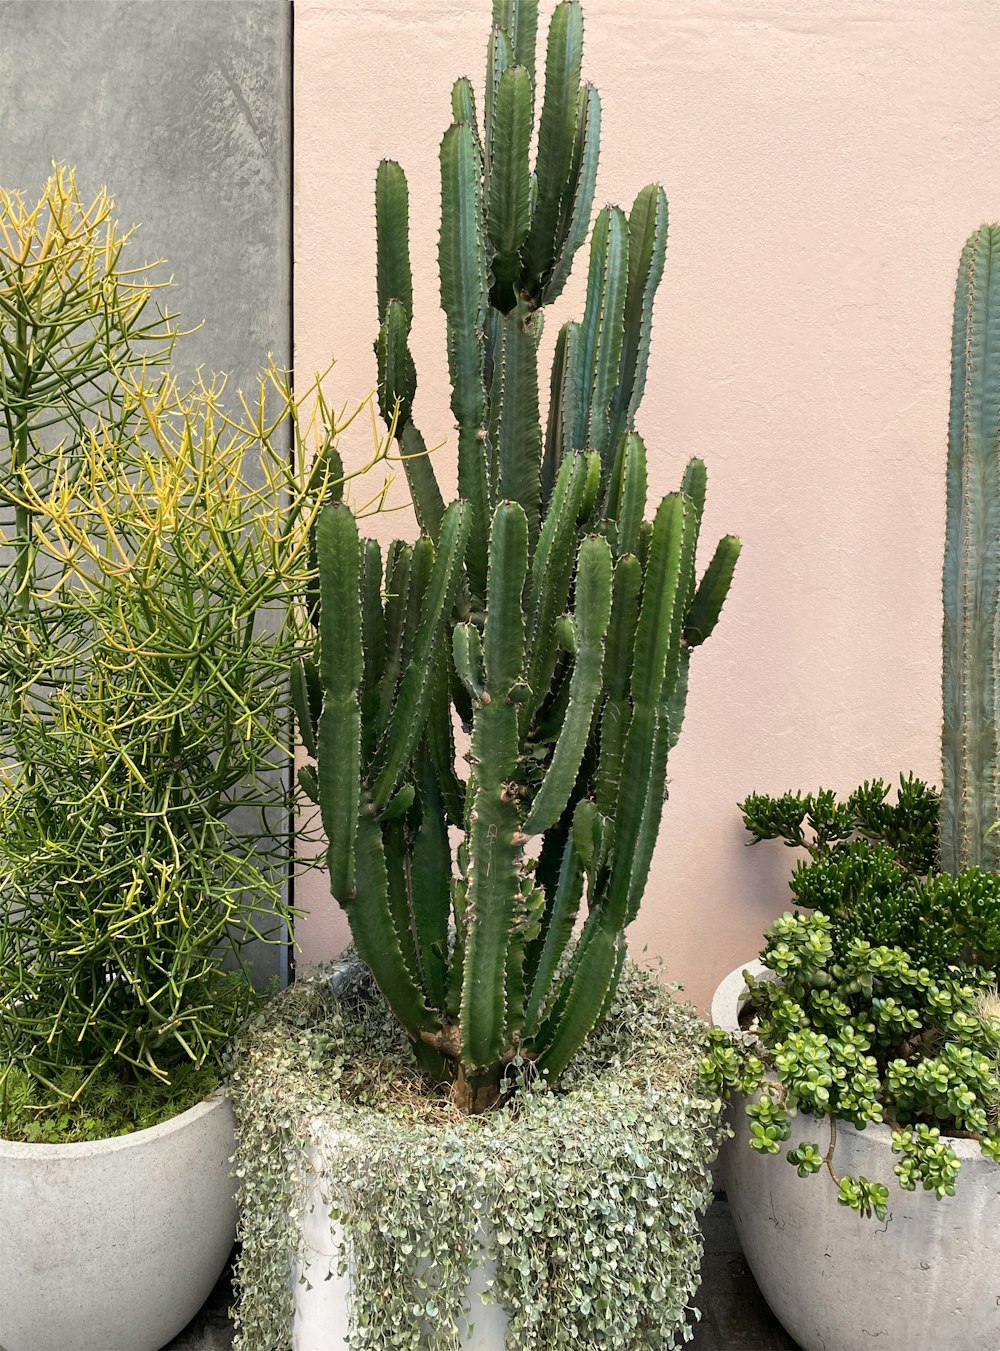 a group of cactus plants sitting next to each other